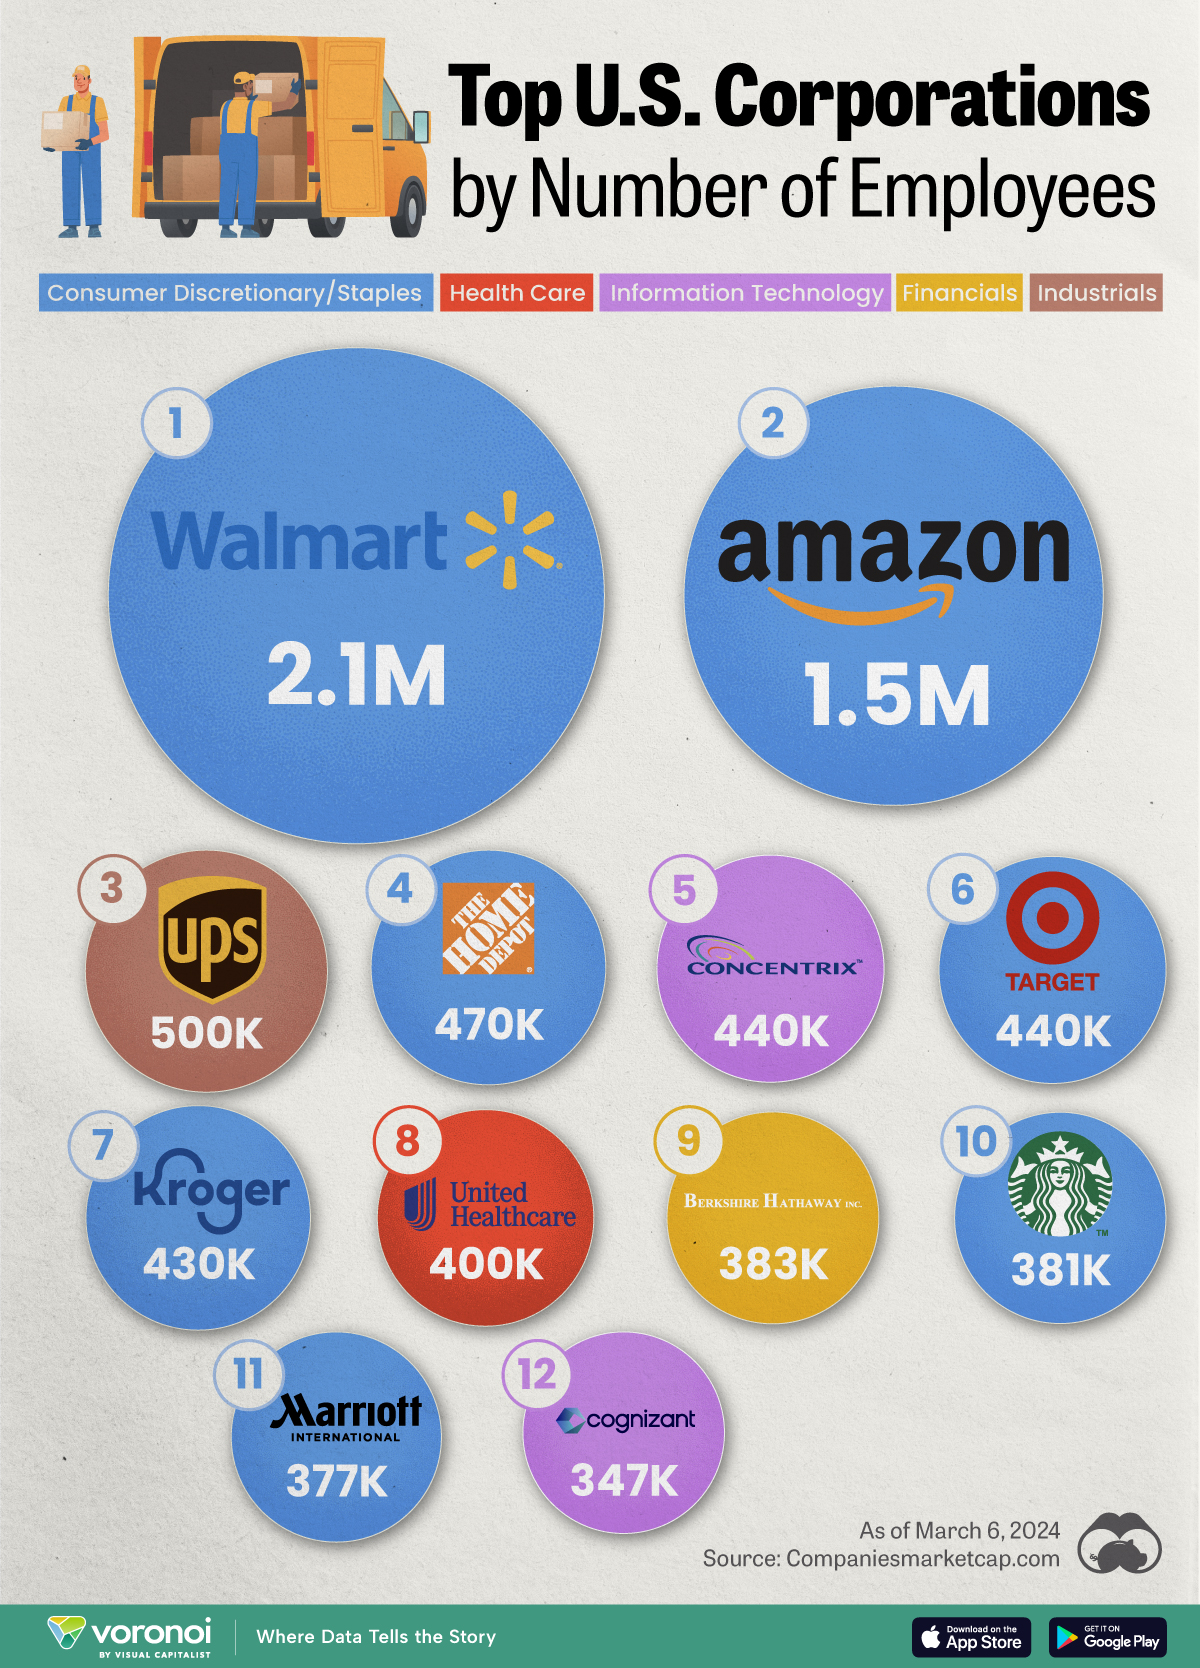 Graphic showing the top U.S. corporations by number of employees